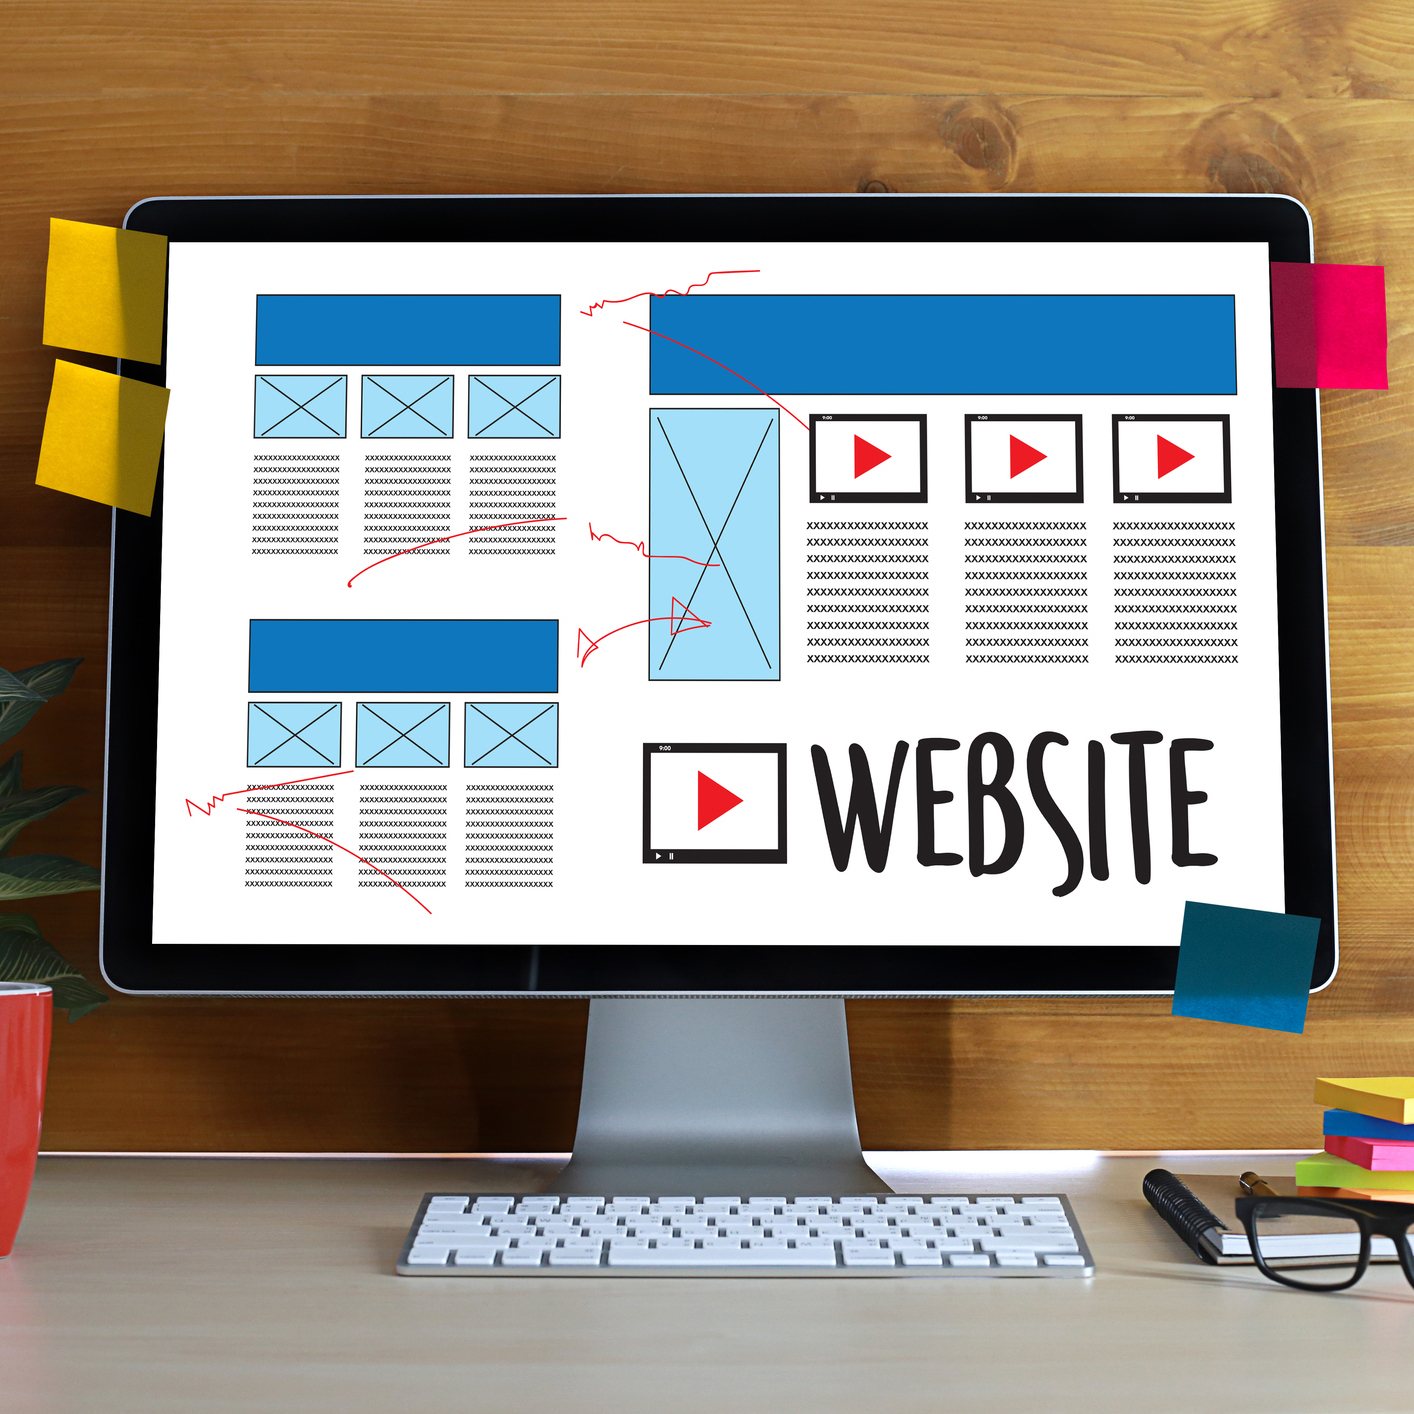 Your Website Needs to be Updated